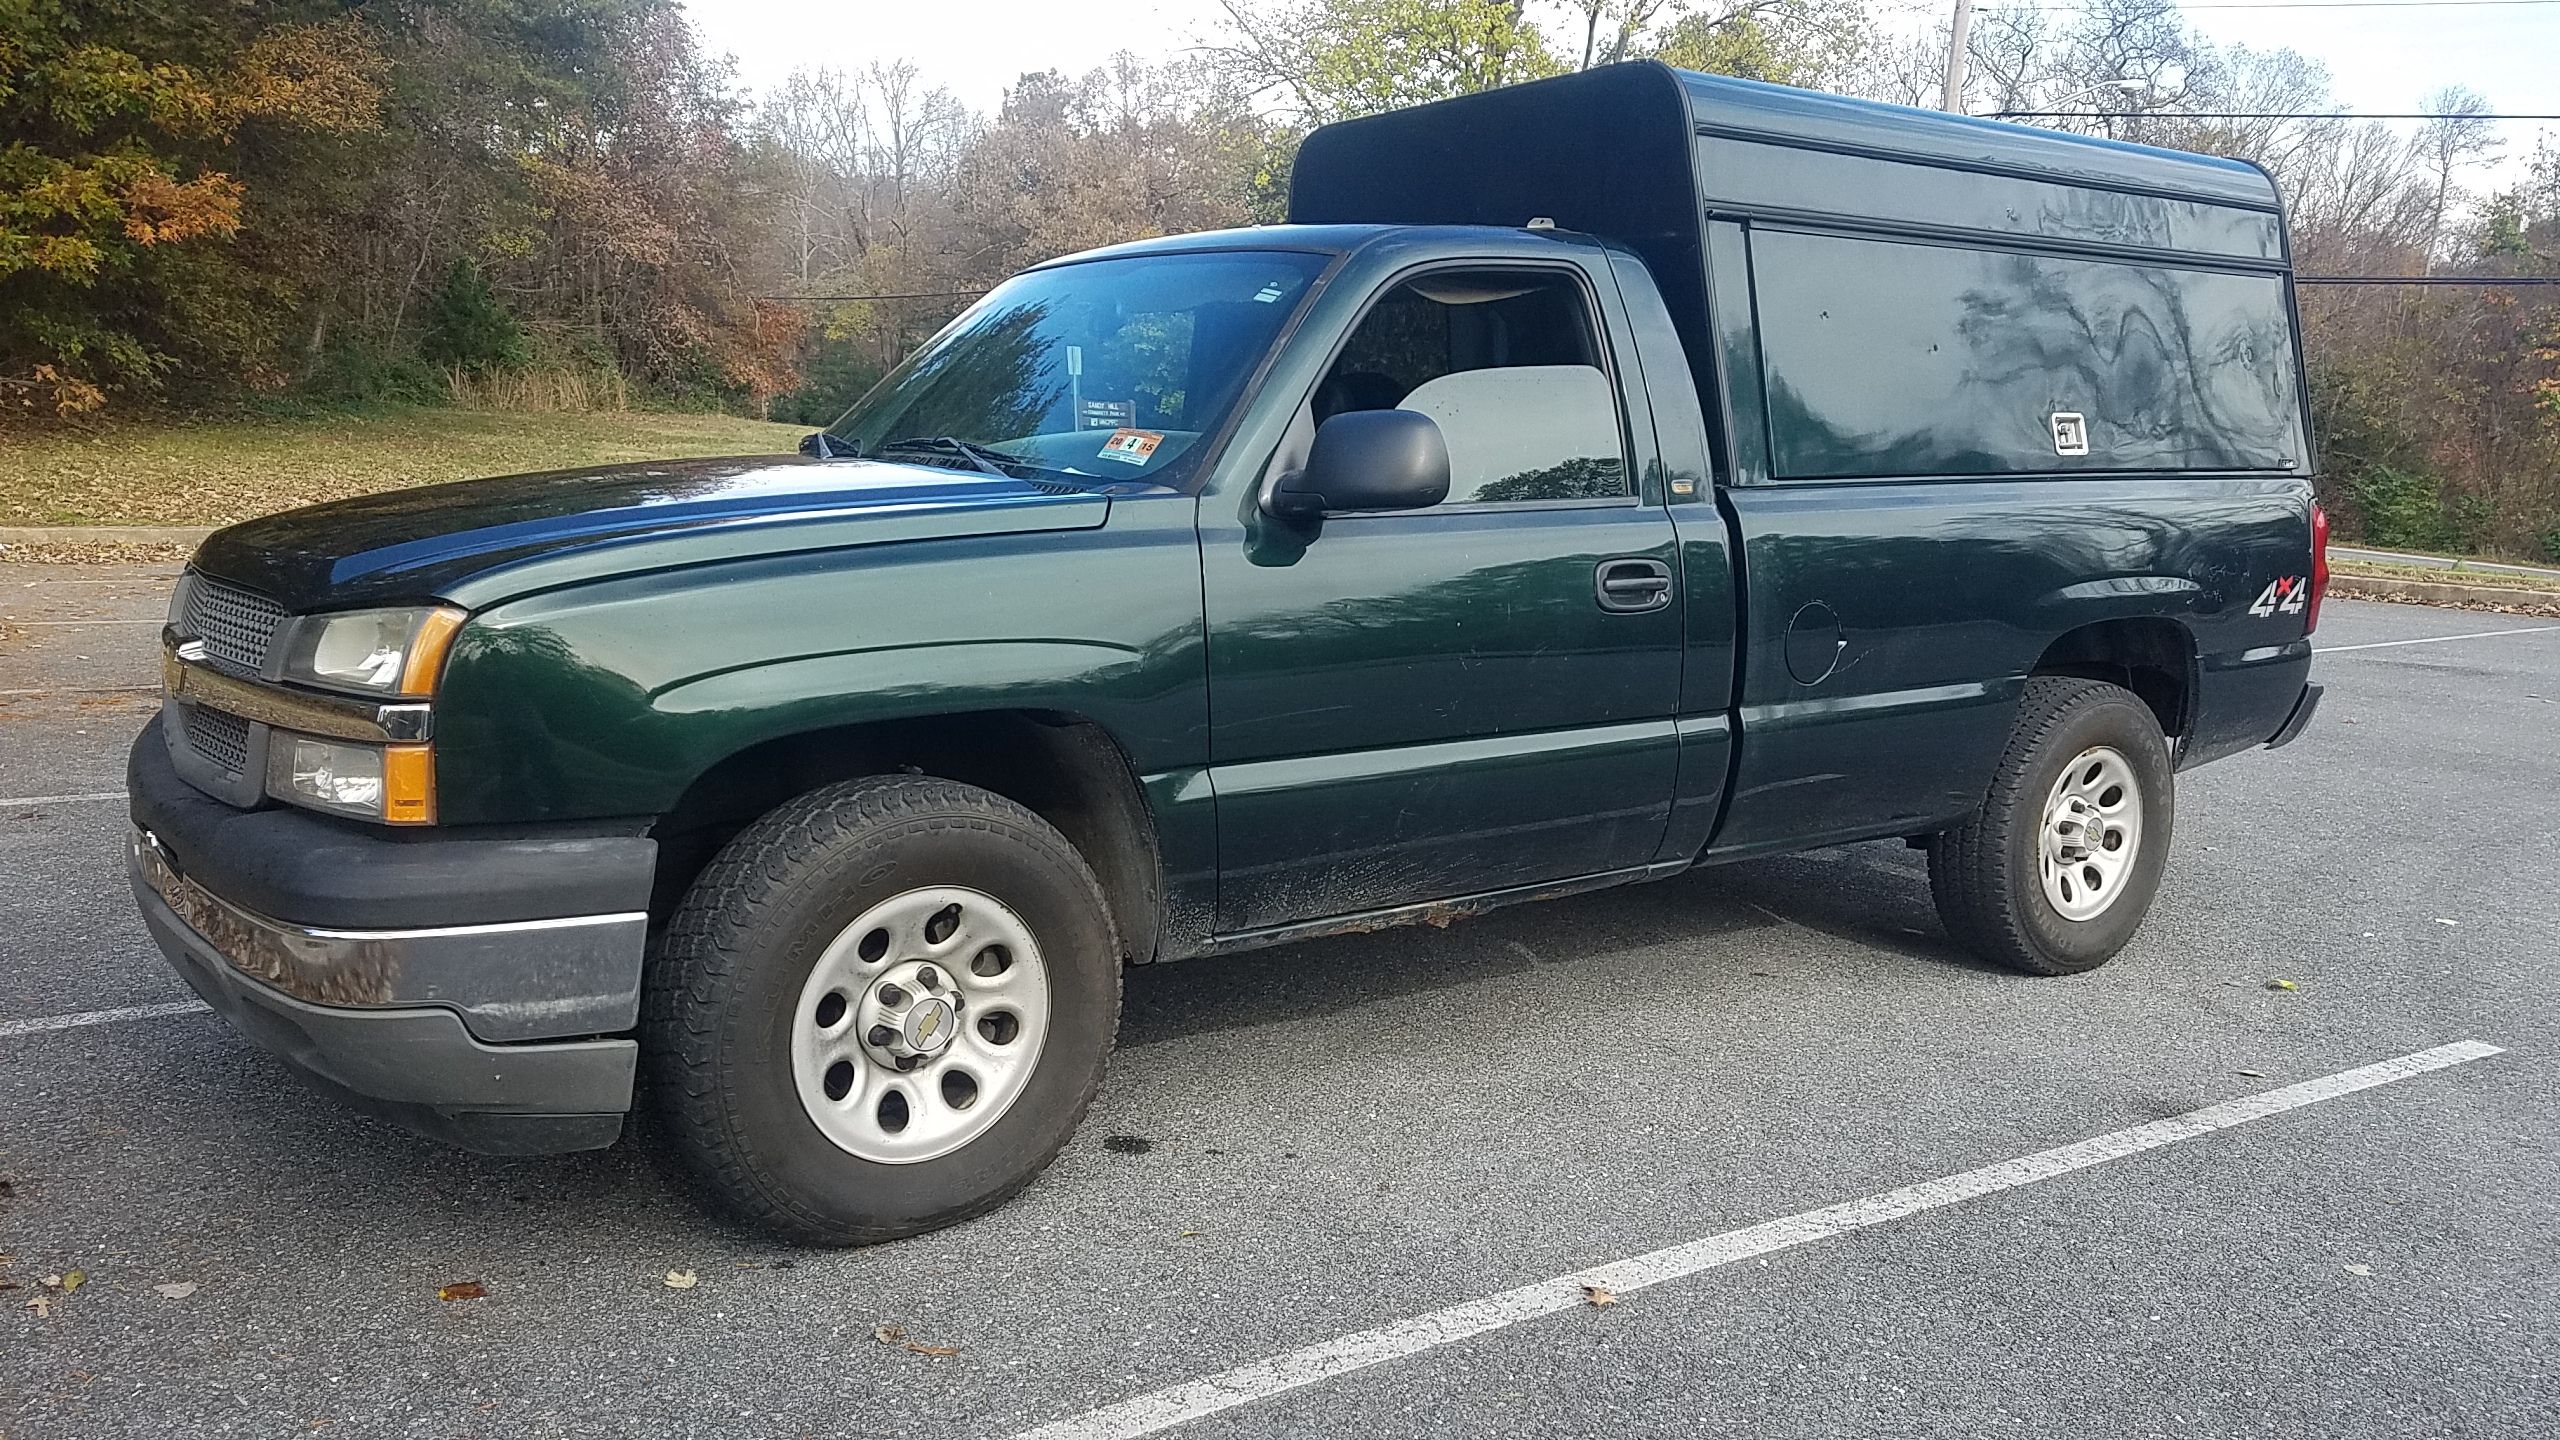 2005 Chevy Silverado 4x4 Great Work Truck 4.8 Liter Automatic Utility Cap Clean Title Good Engine Good Transmission Clean Undercarriage